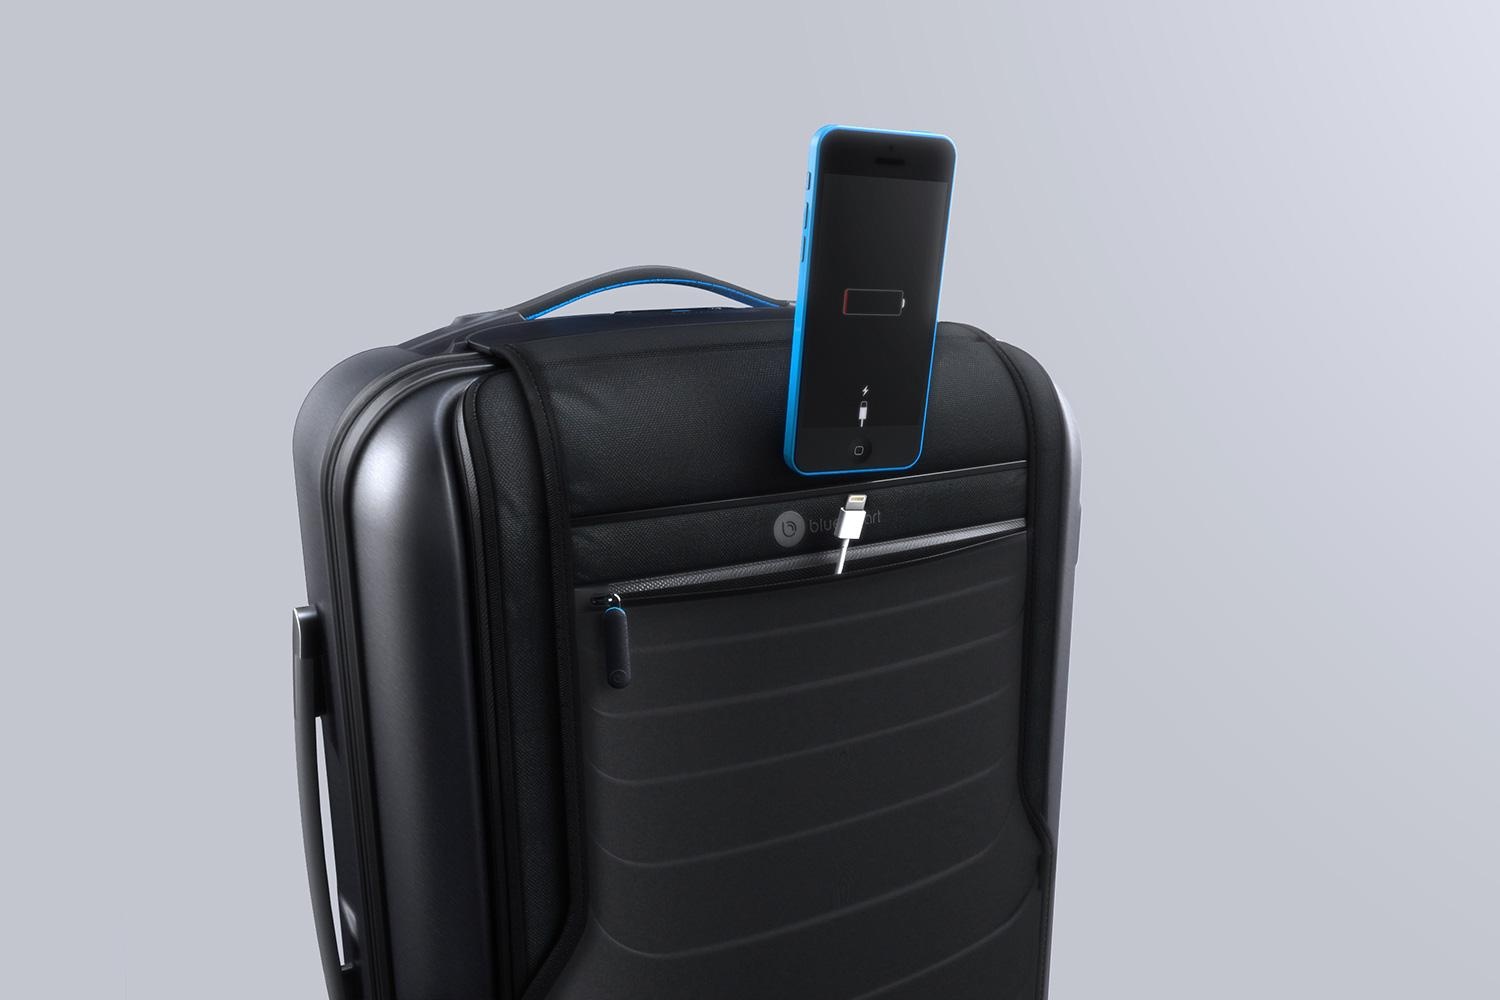 bluesmart-connected-suitcase-iphone-charge-1500×1000